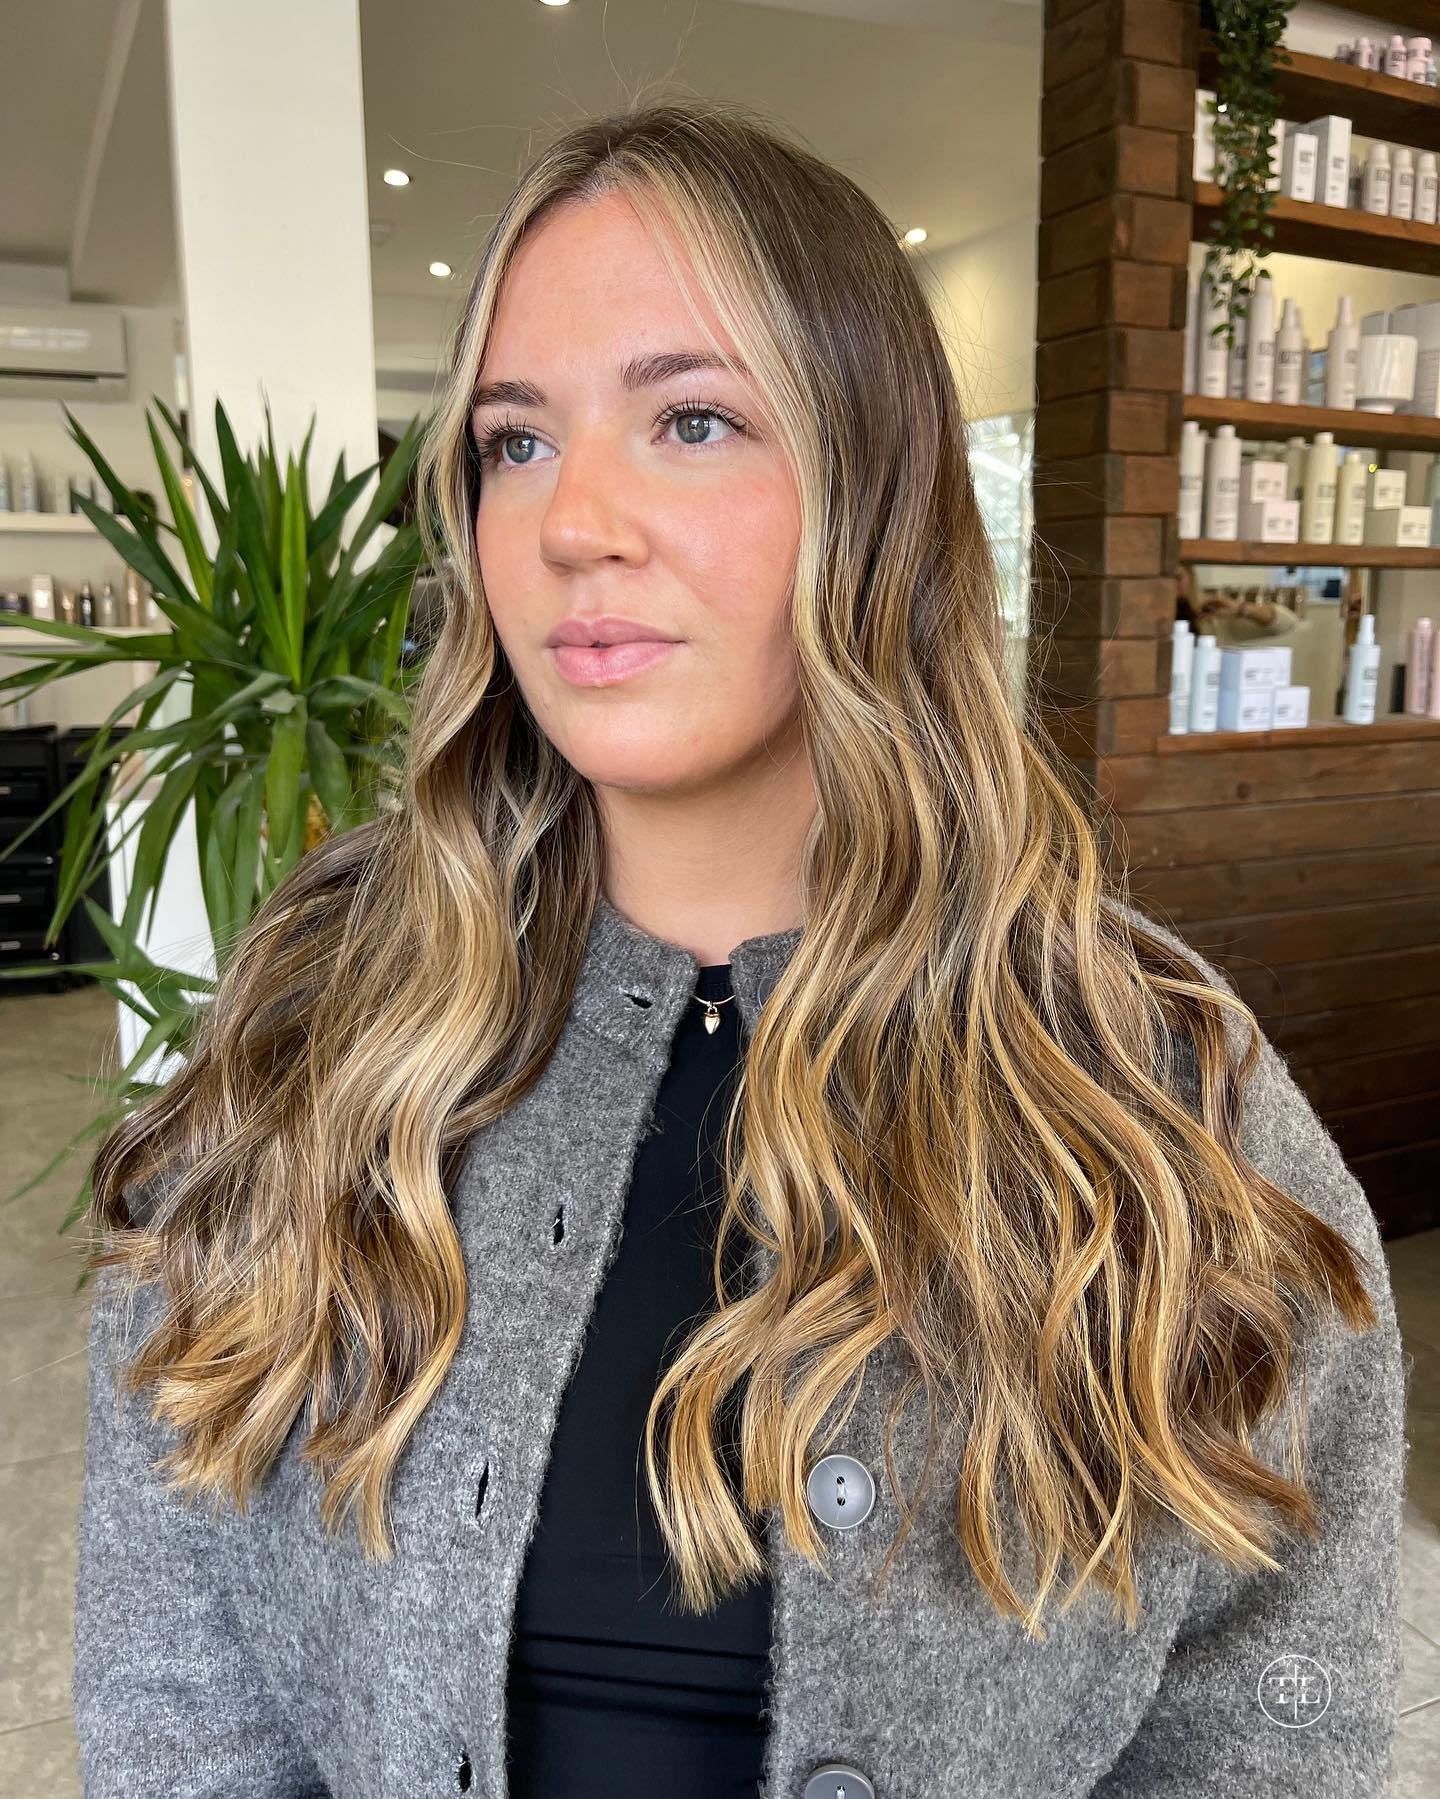 Sunkissed balayage ☀️
Beachy blonde bits amongst a darker base to create this beautiful contrast. Perfect for them brunette who want to brighten up their hair ready for summer 🌼

Stylist - @hairbyelliethomson 
Using - @schwarzkopfprouk #blondme &amp